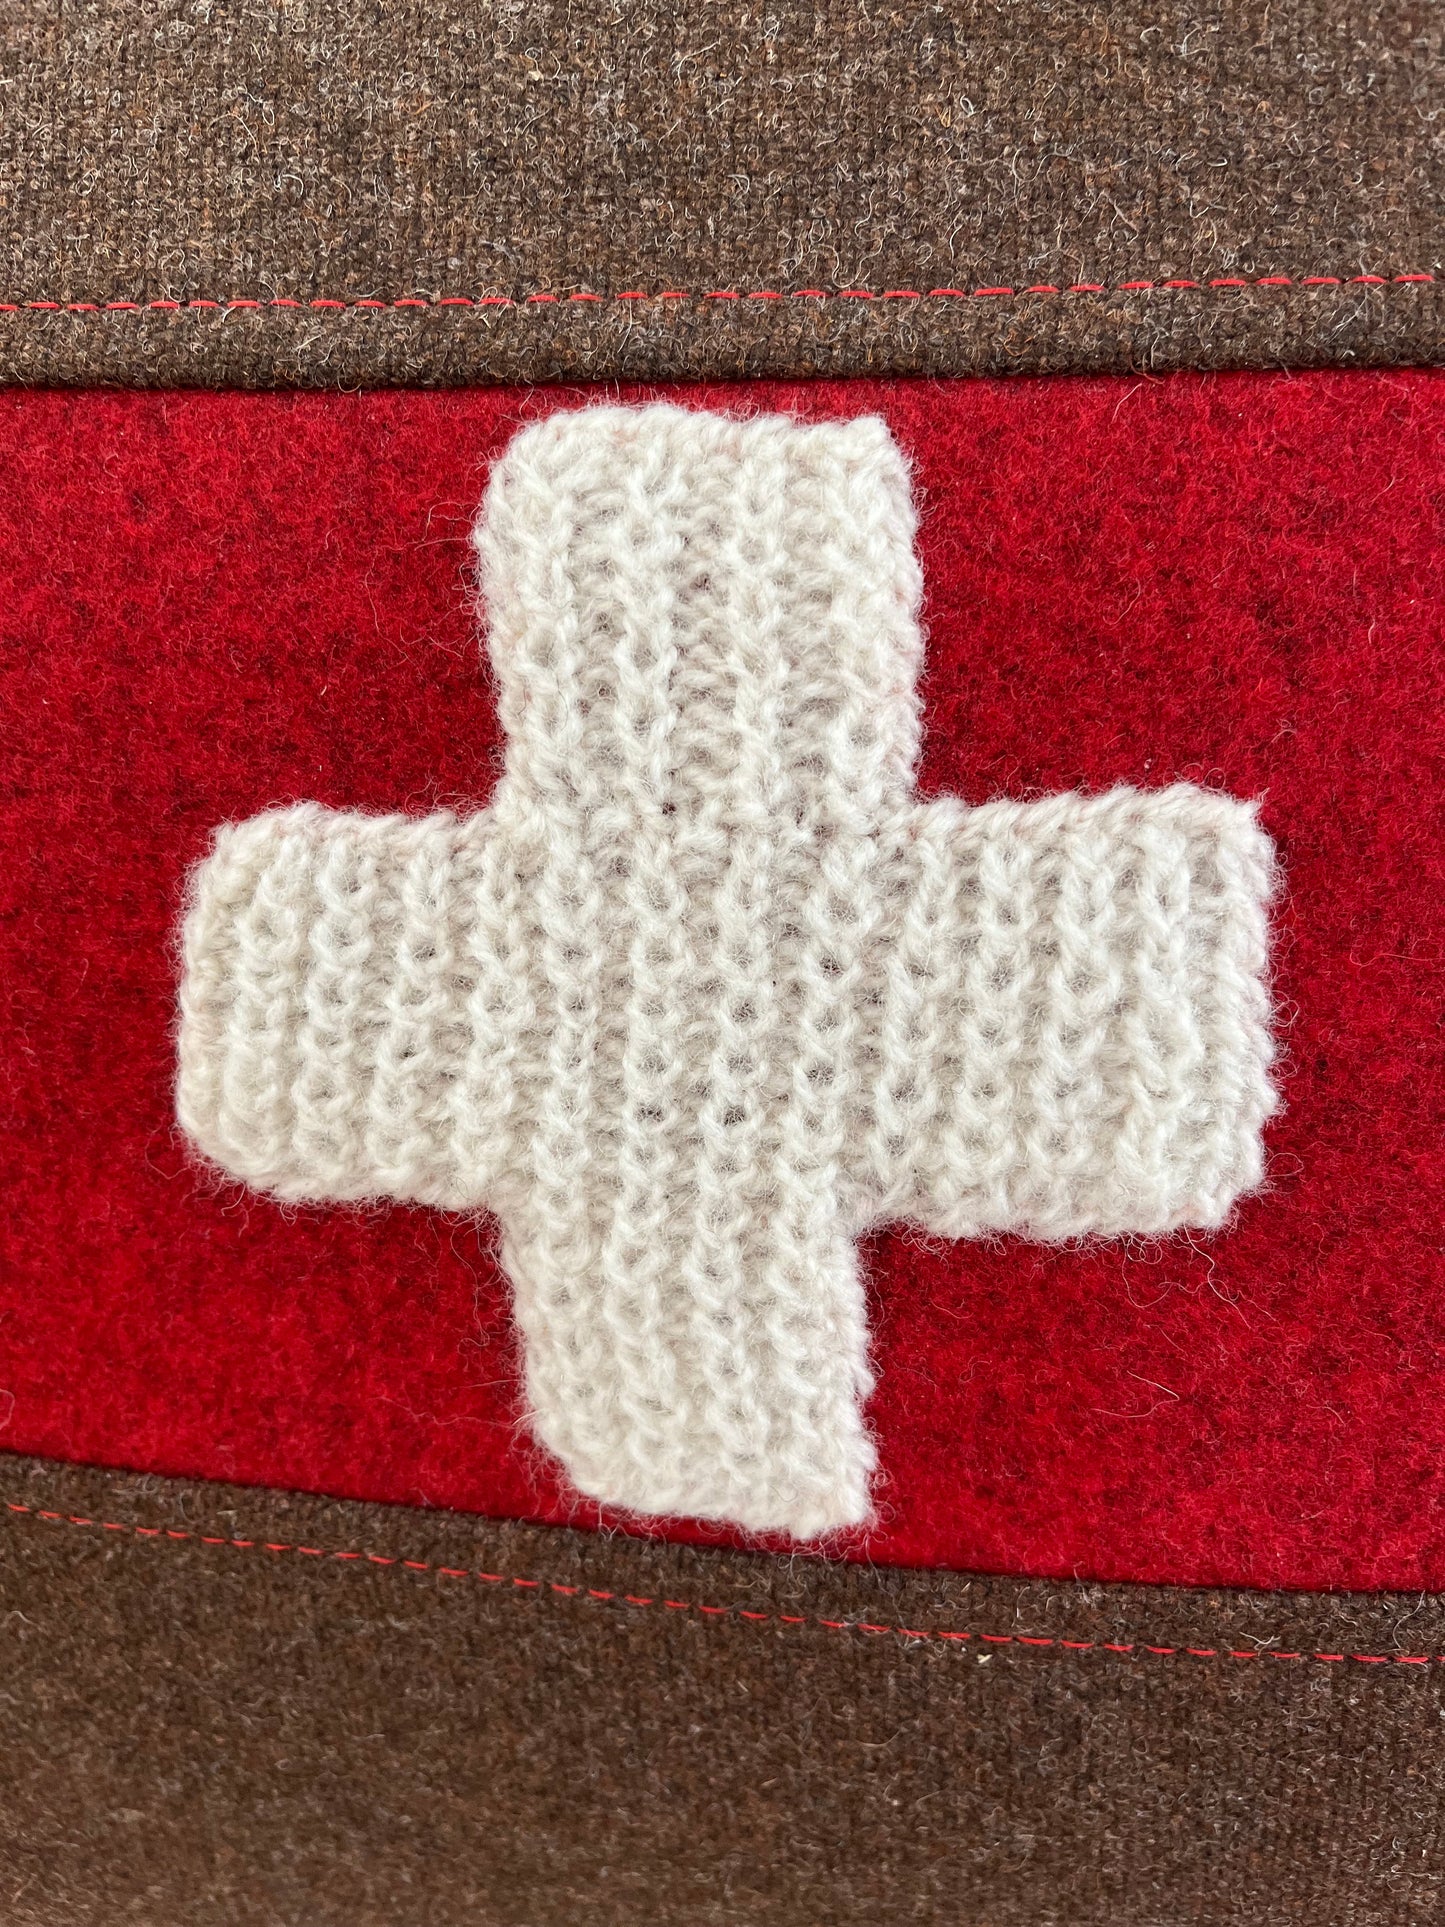 Swiss Army Blanket inspired cushion cover